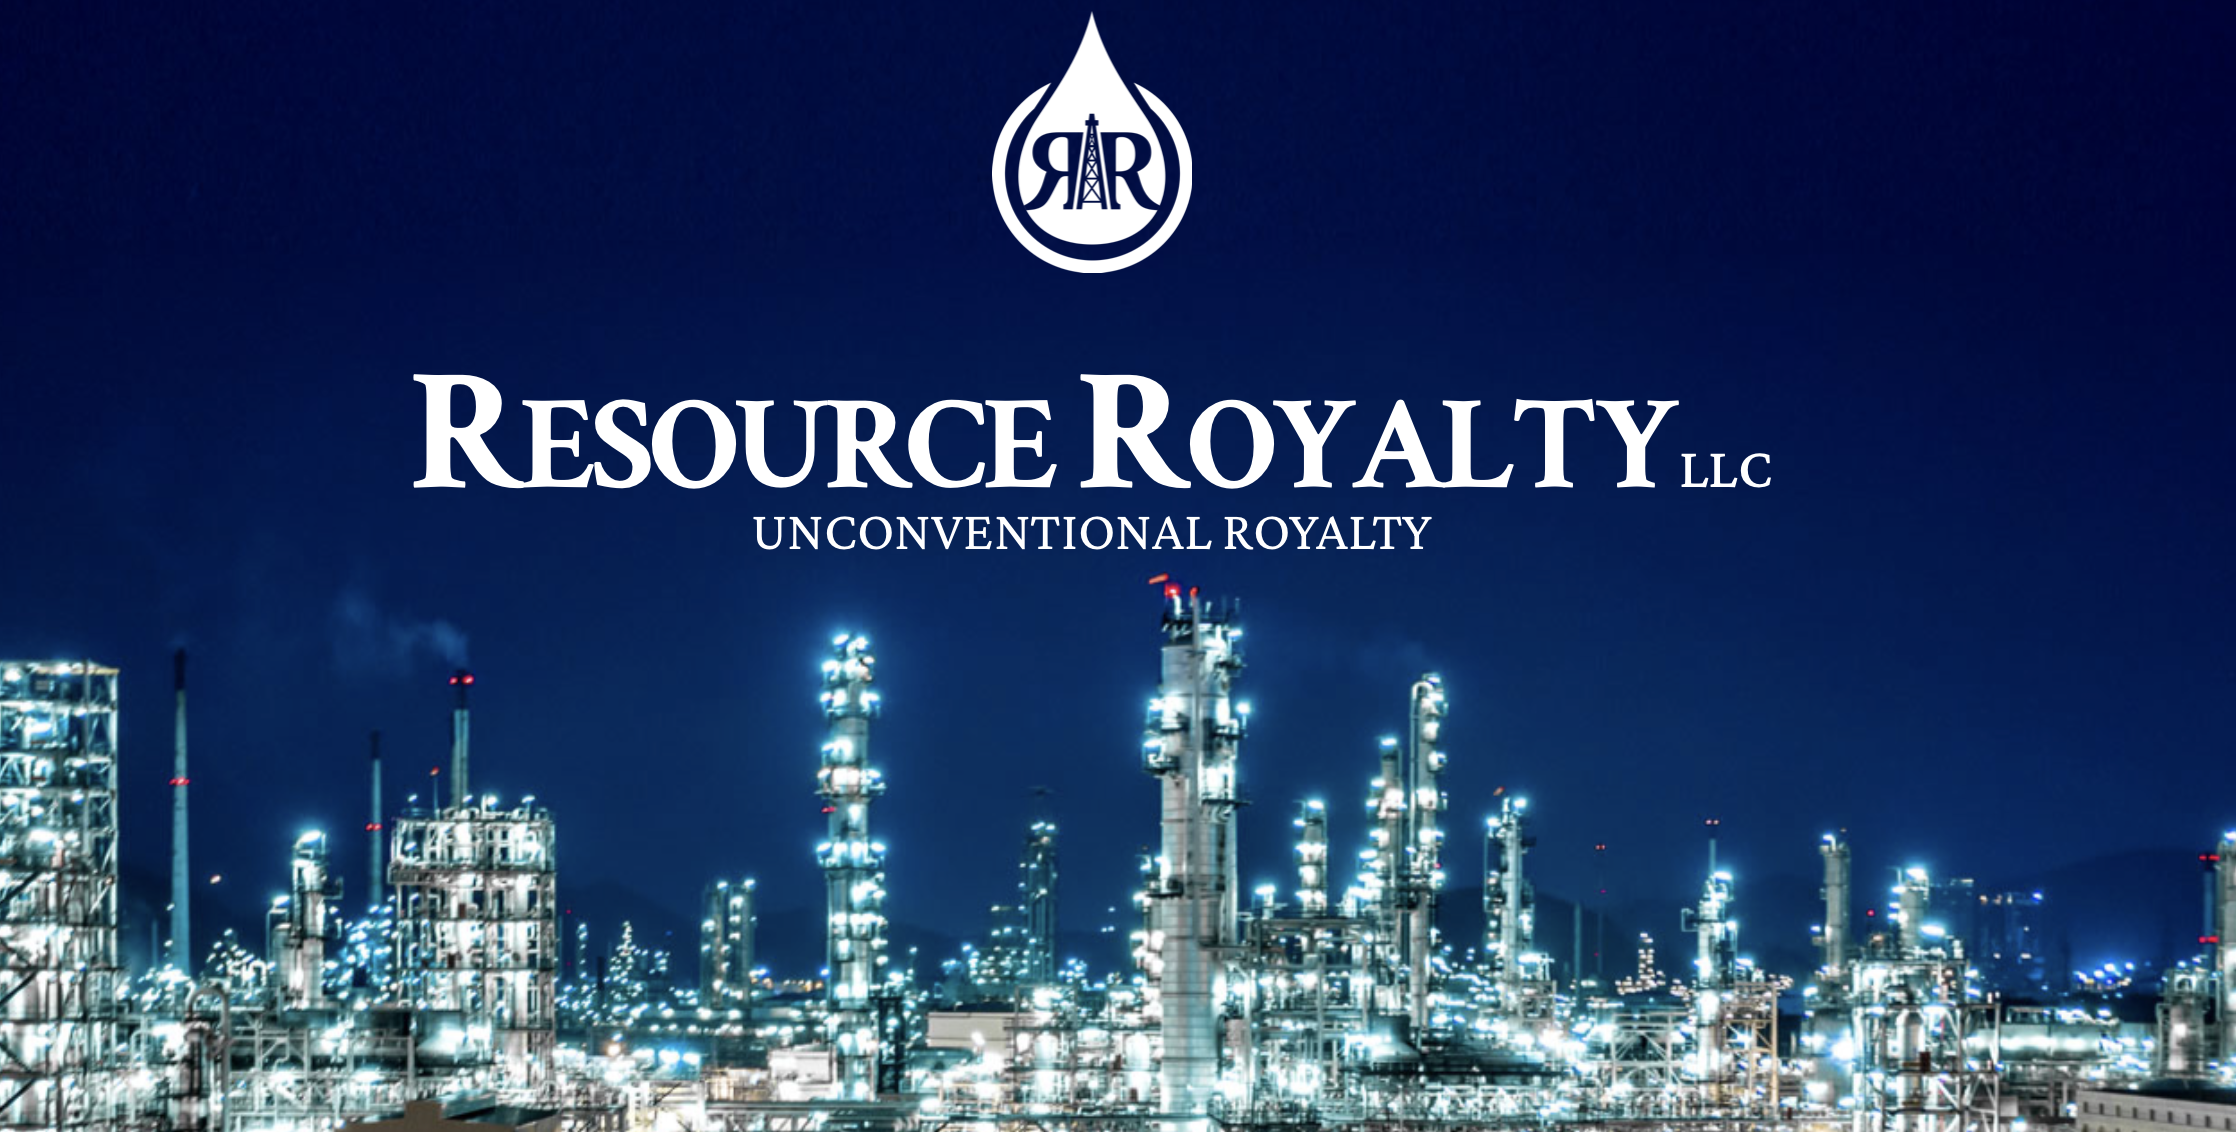 Resource Royalty Announces Closing of RR XVIII